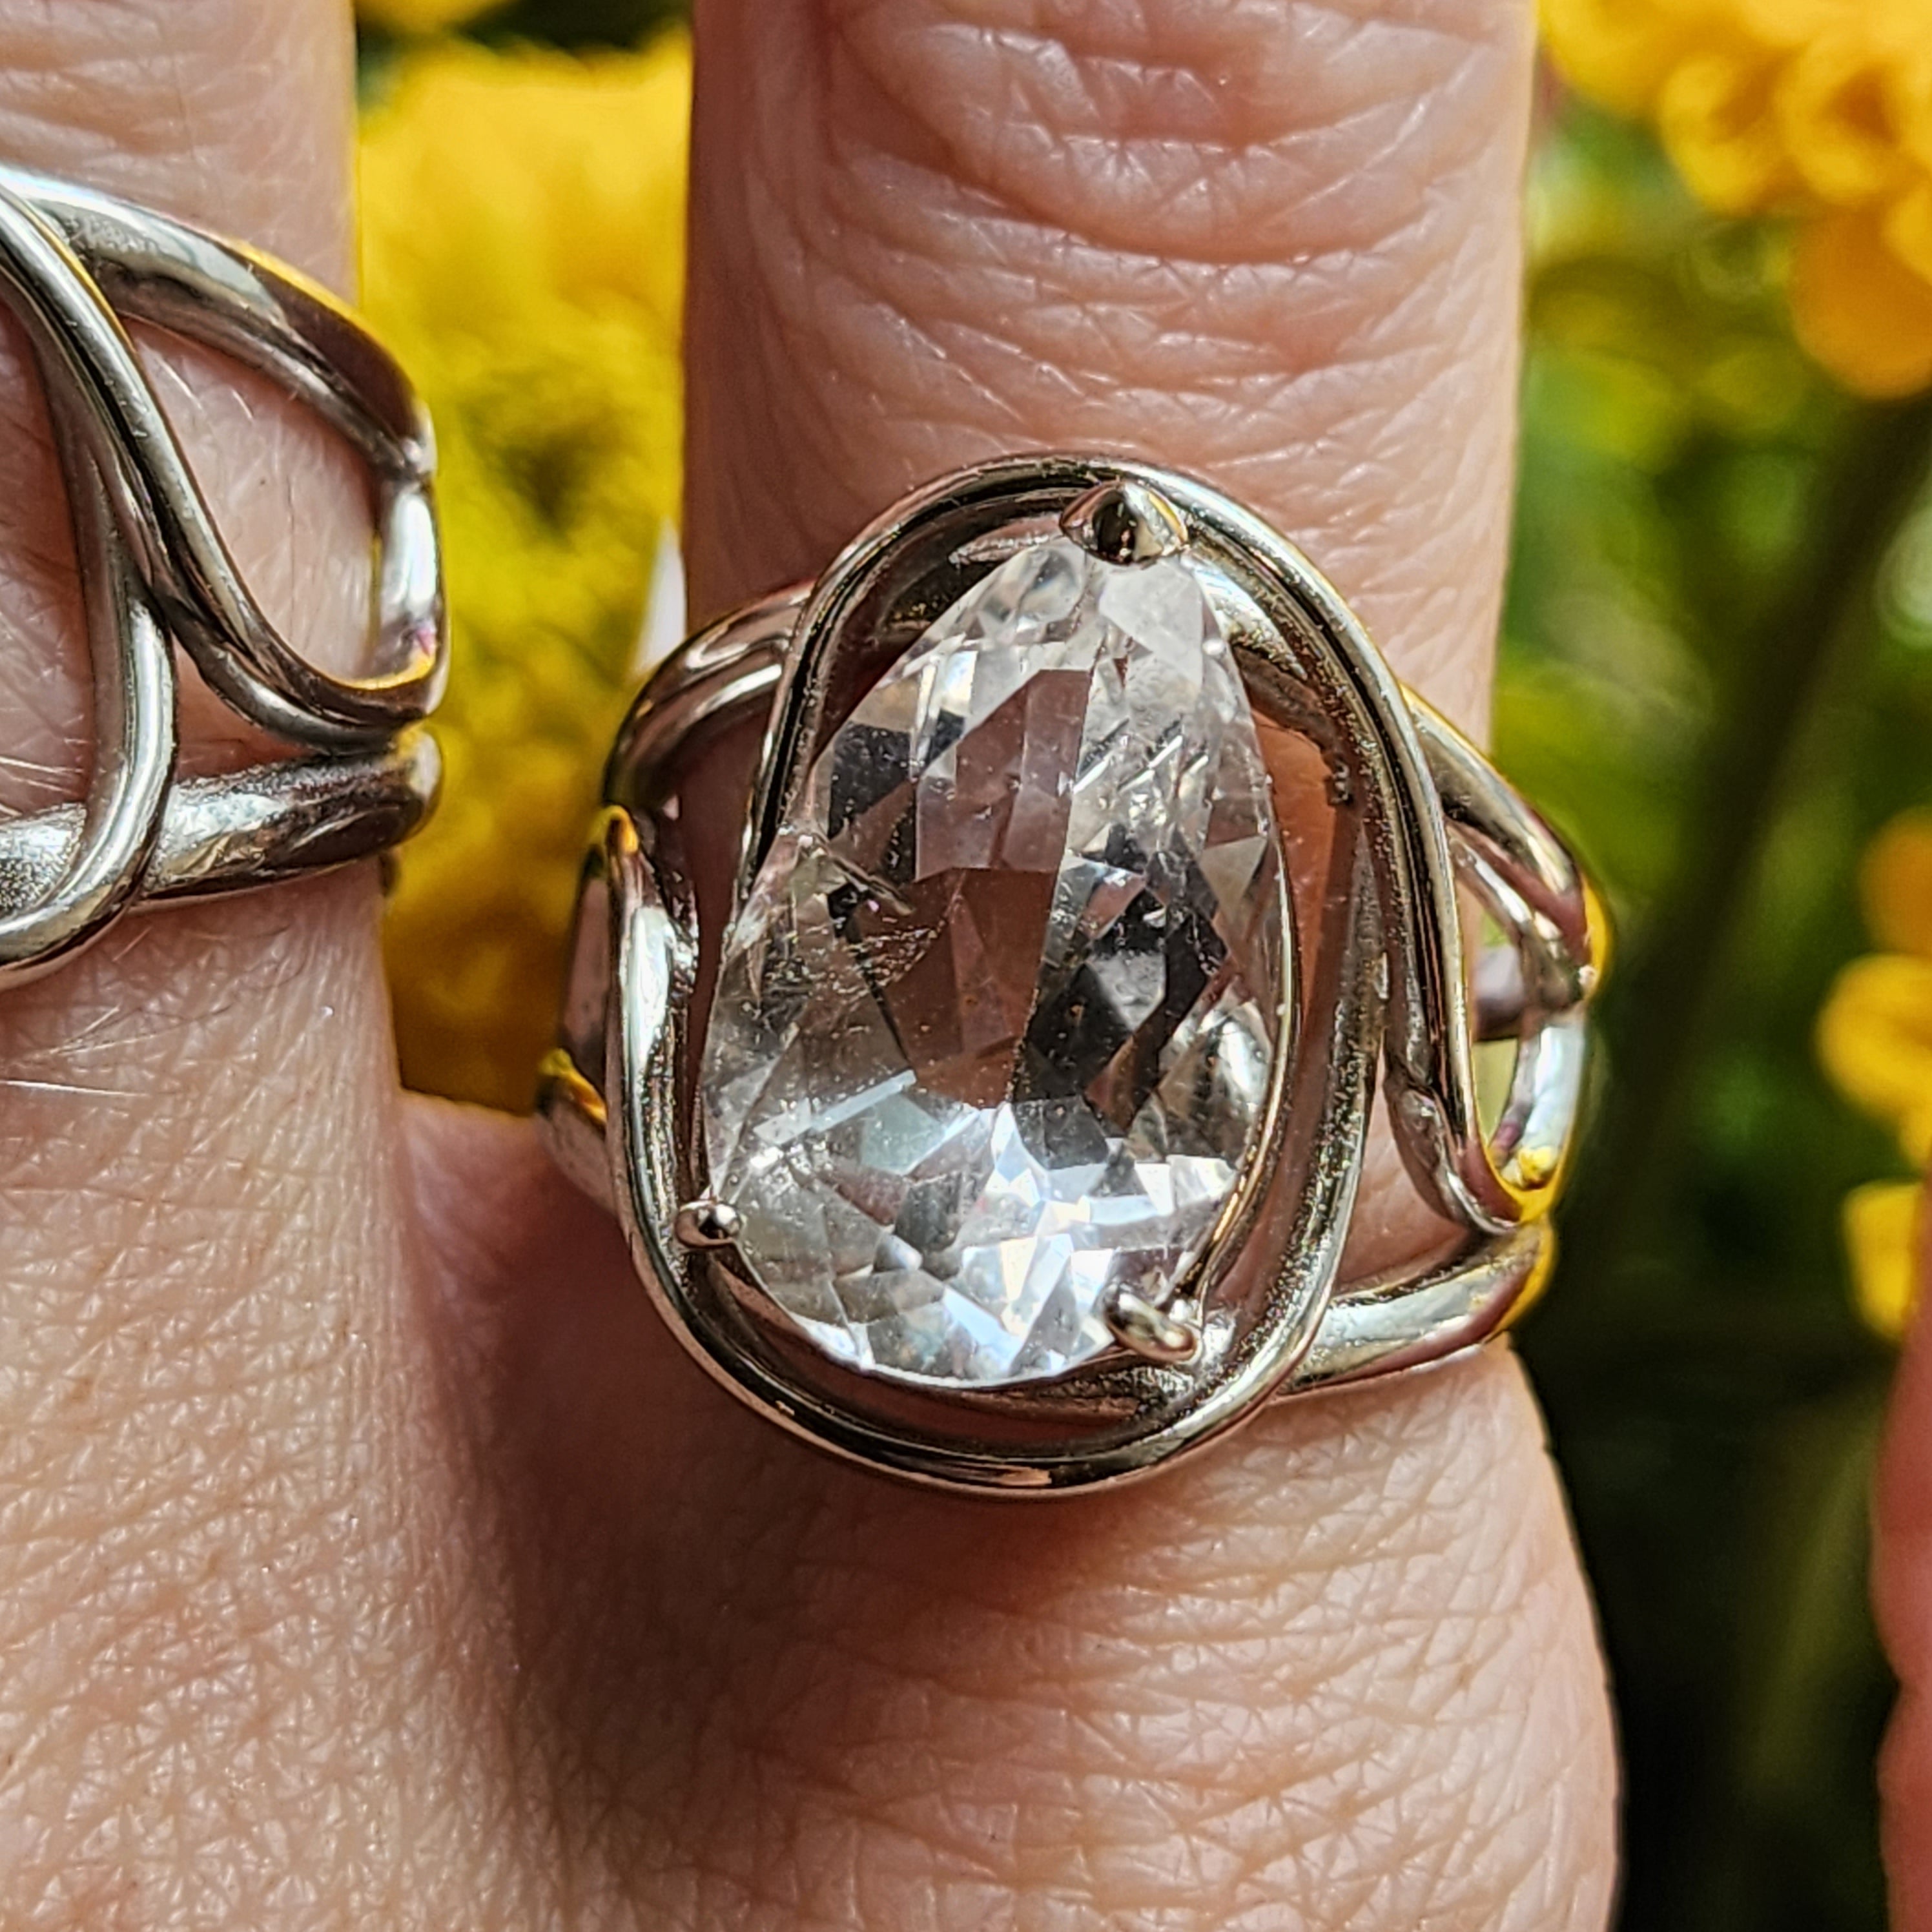 Rick's Doorbuster Deal! Ring & Pendant Gift Set ~ Danburite Finger Cuff Adjustable Ring & Pendant in .925 Silver (Gem Grade) for Connection with Higher Realms, Peace and Self Acceptance